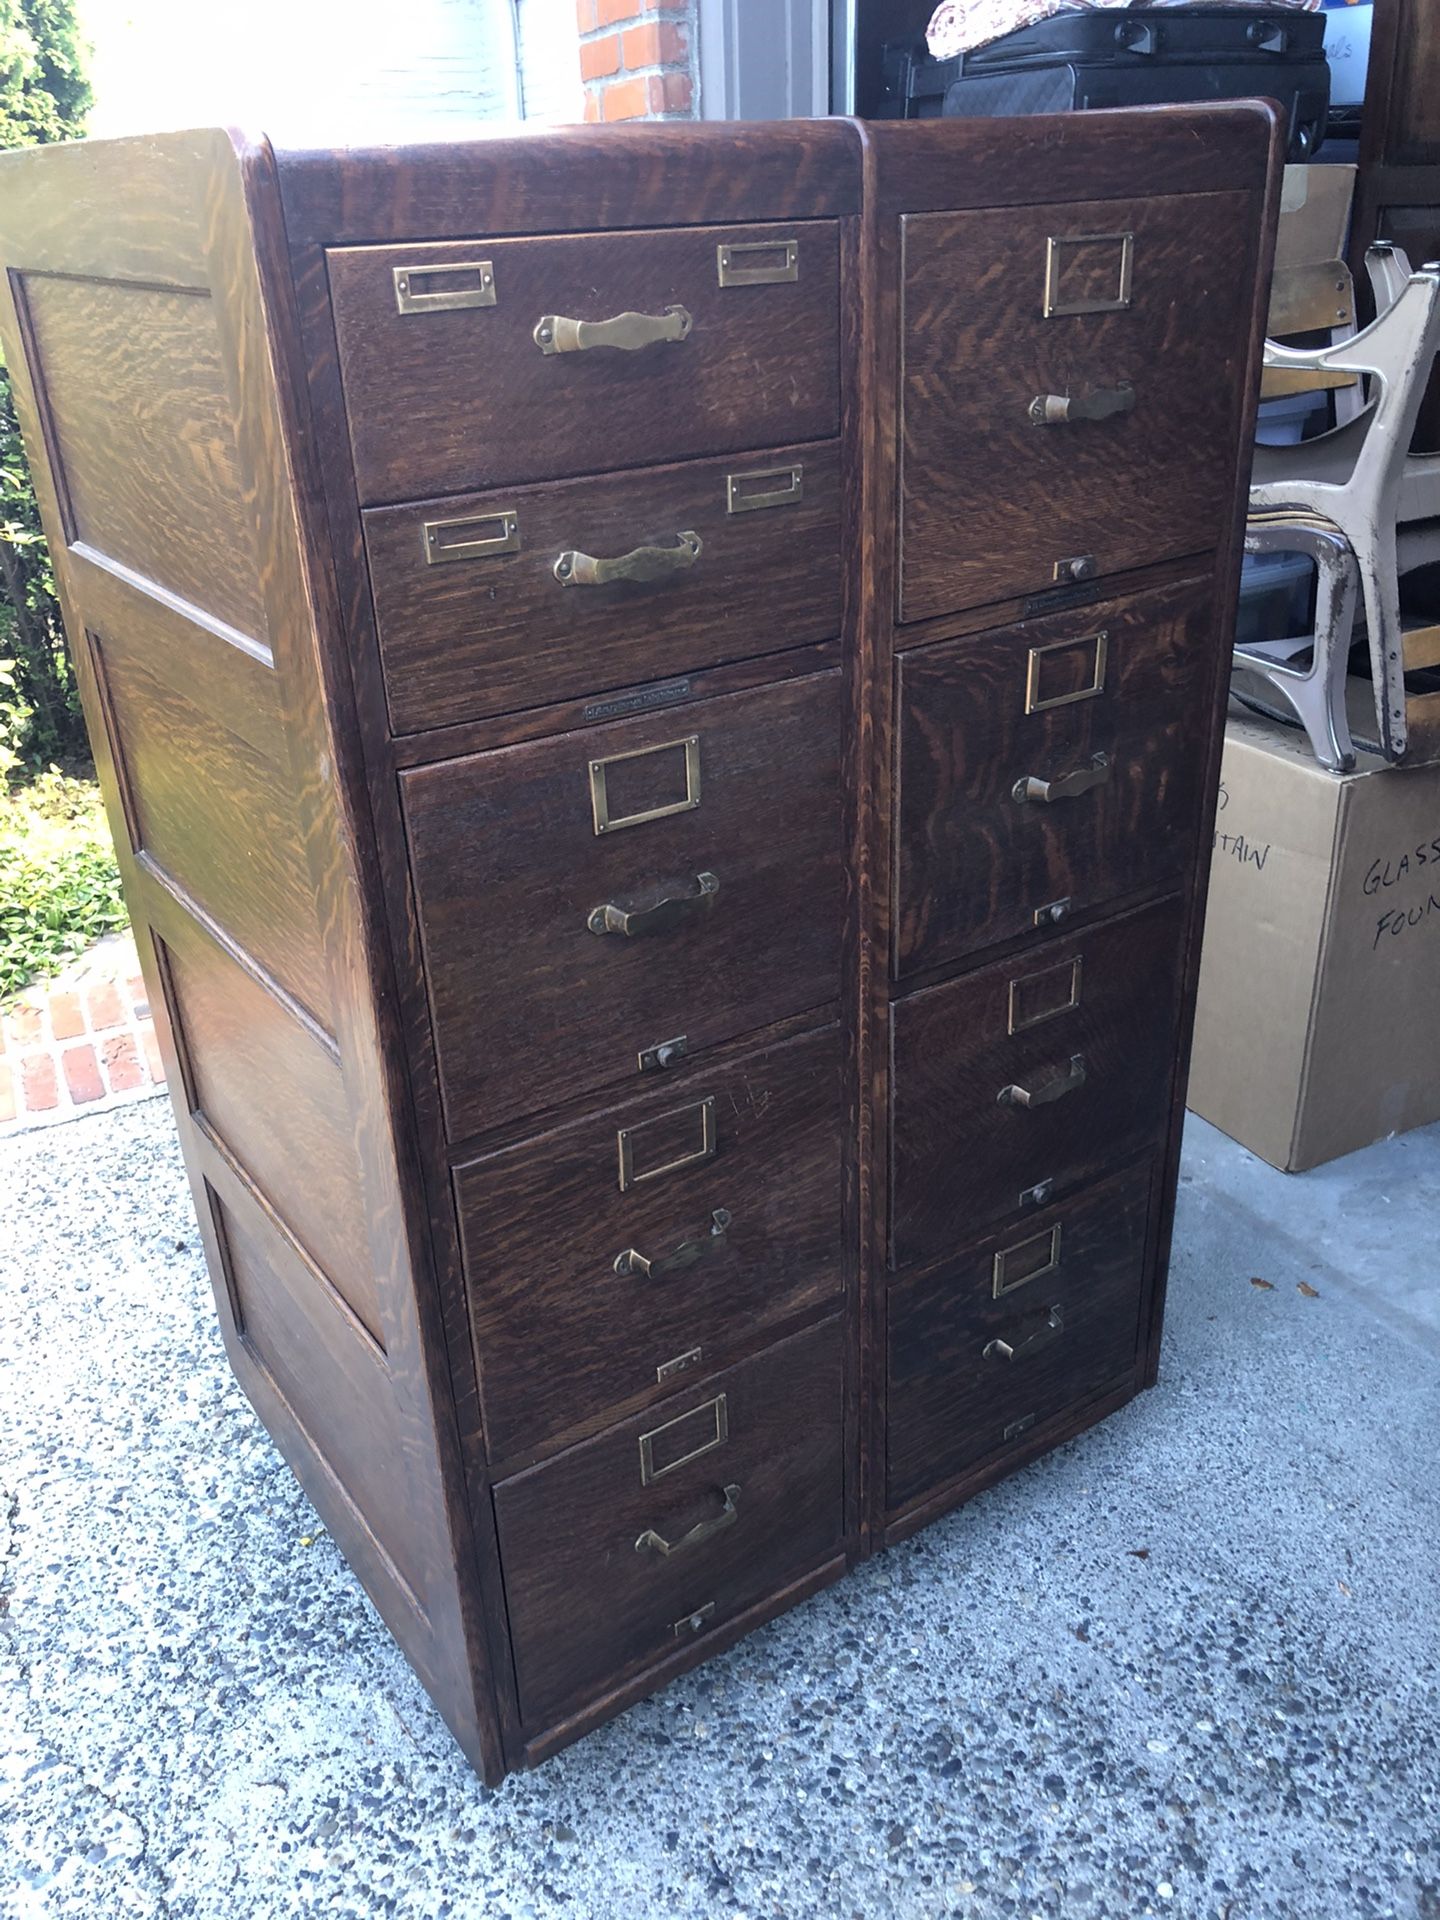 Antique Filing cabinet (on wheels)